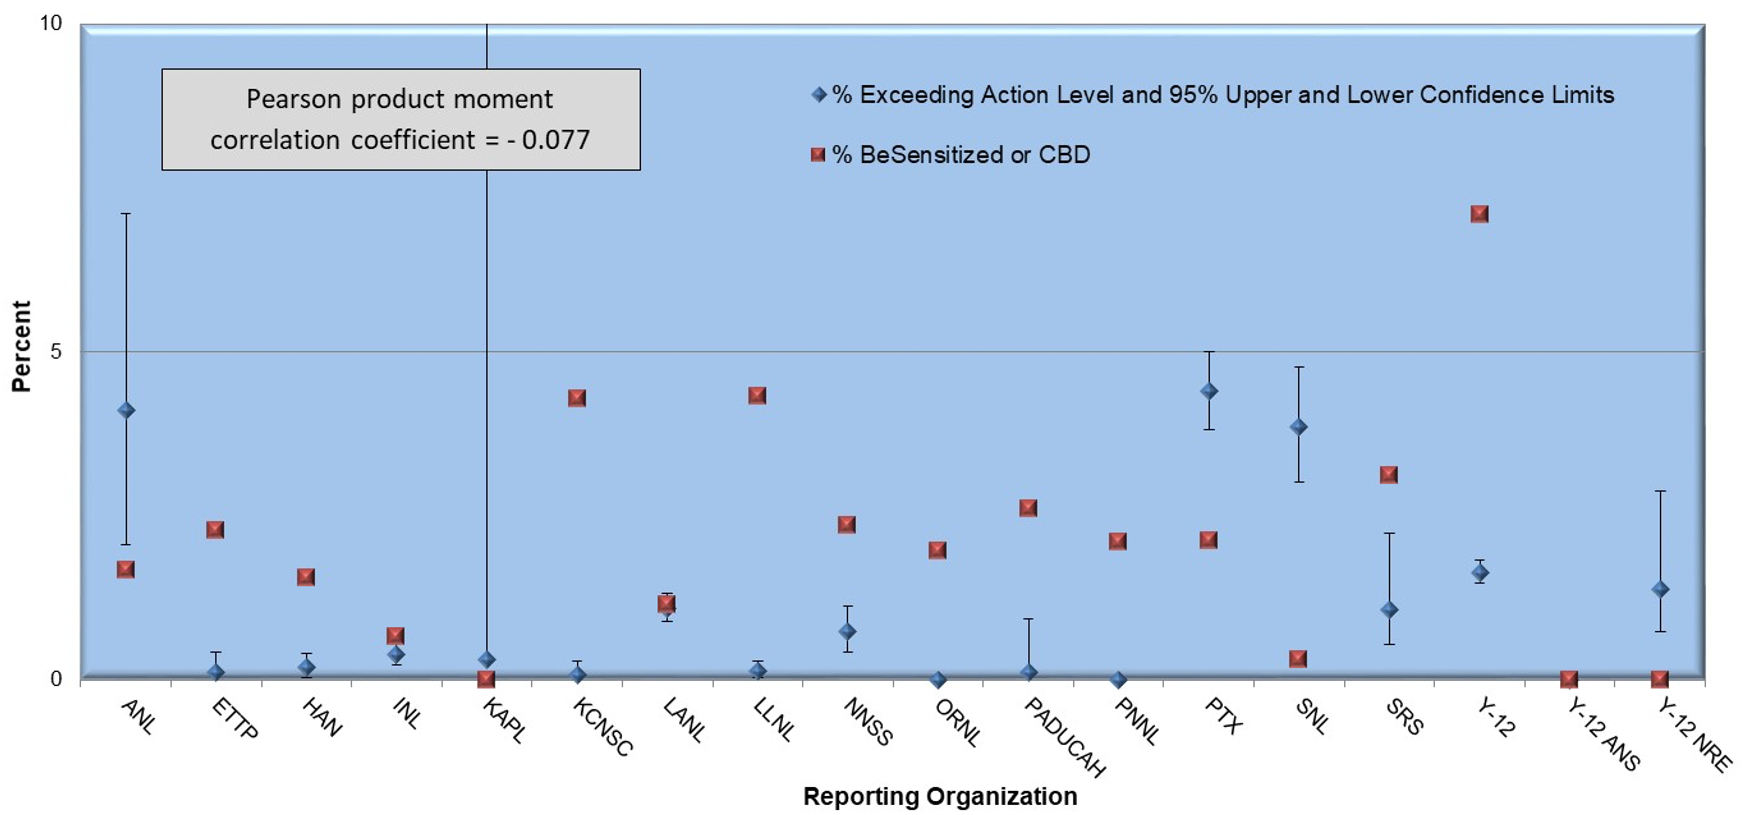 Comparison of the Percent of Workers Diagnosed with BeS or CBD with Percent Exceeding Action Level 0.2 μg/m3 by Reporting Organization (2002-2019). infographic